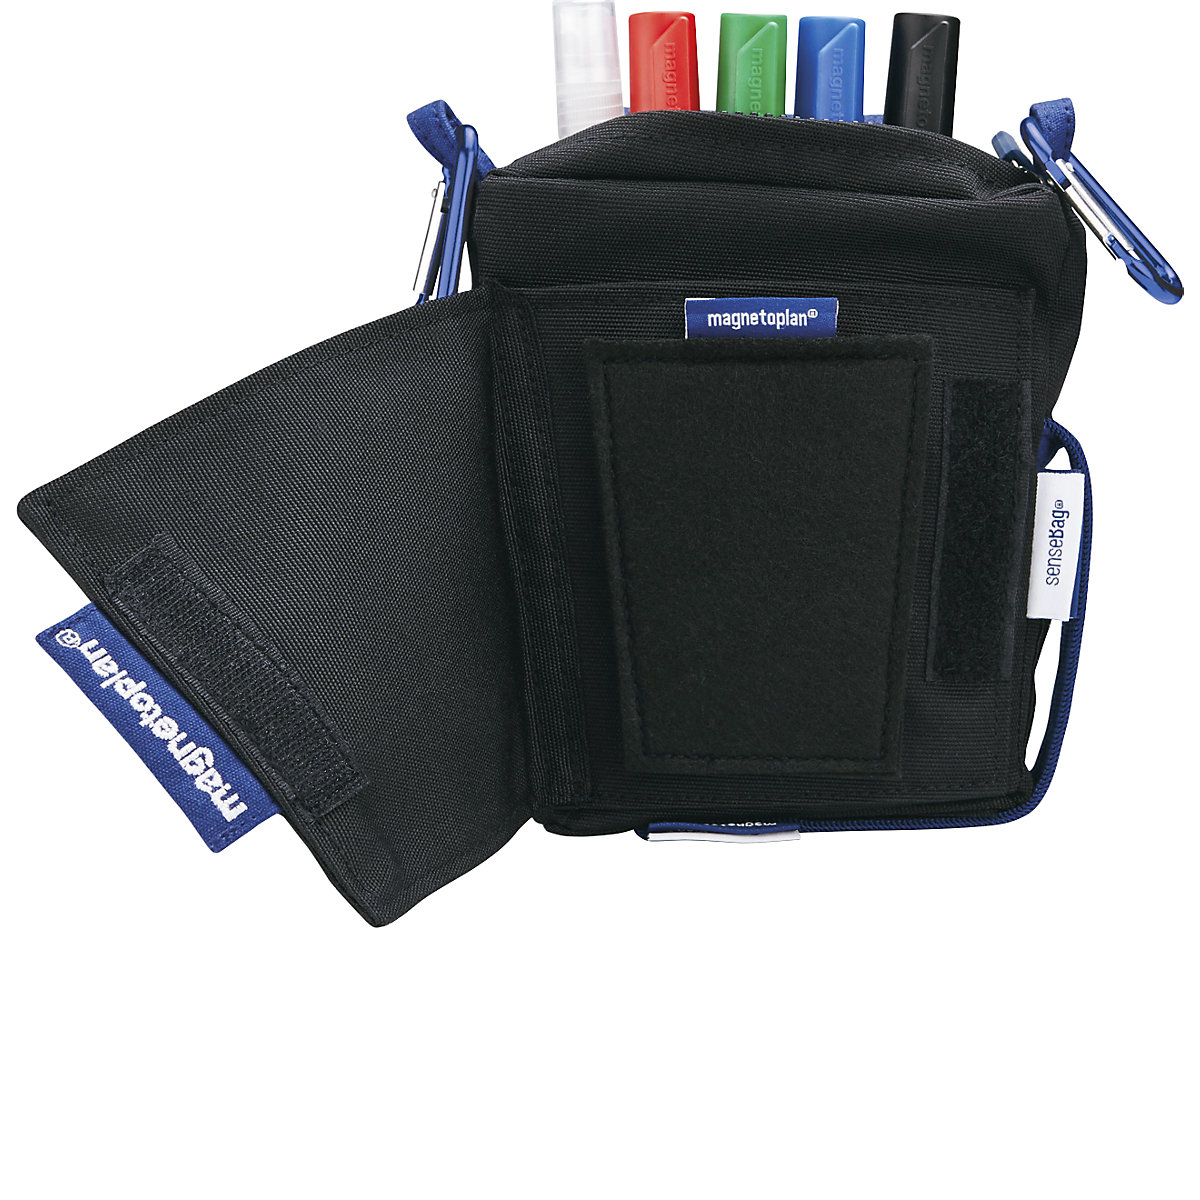 ACTION HOLSTER presentation pouch - magnetoplan